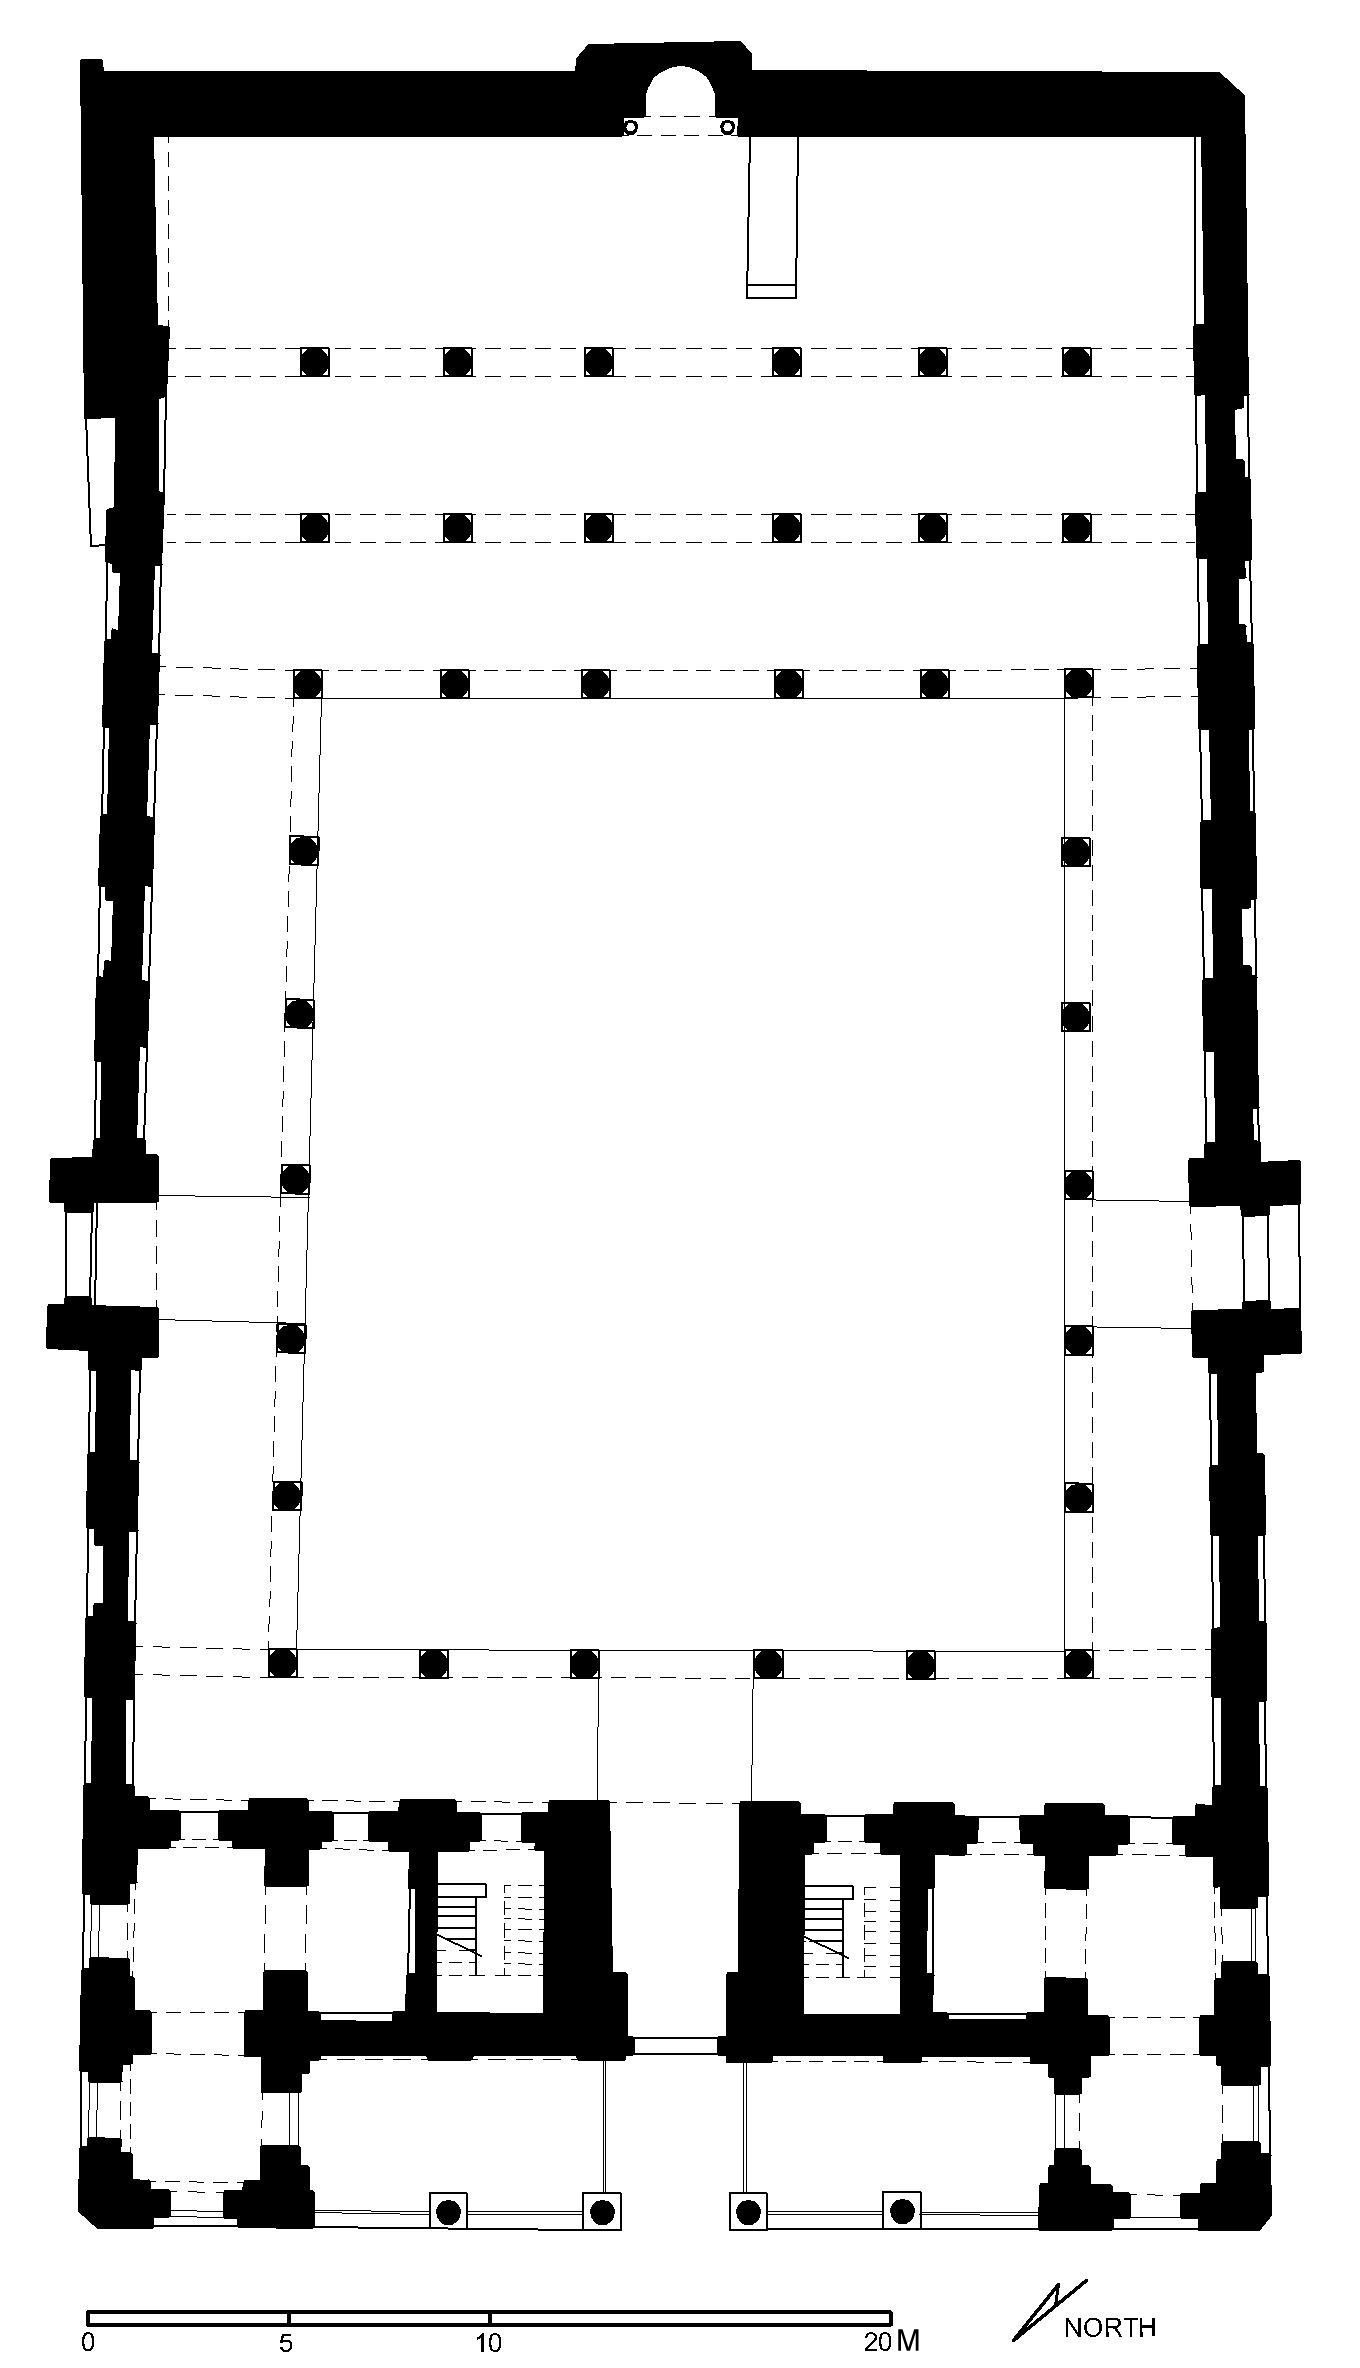 Masjid al-Salih Tala'i' - Floor plan of mosque (after Meinecke) in AutoCAD 2000 format. Click the download button to download a zipped file containing the .dwg file.